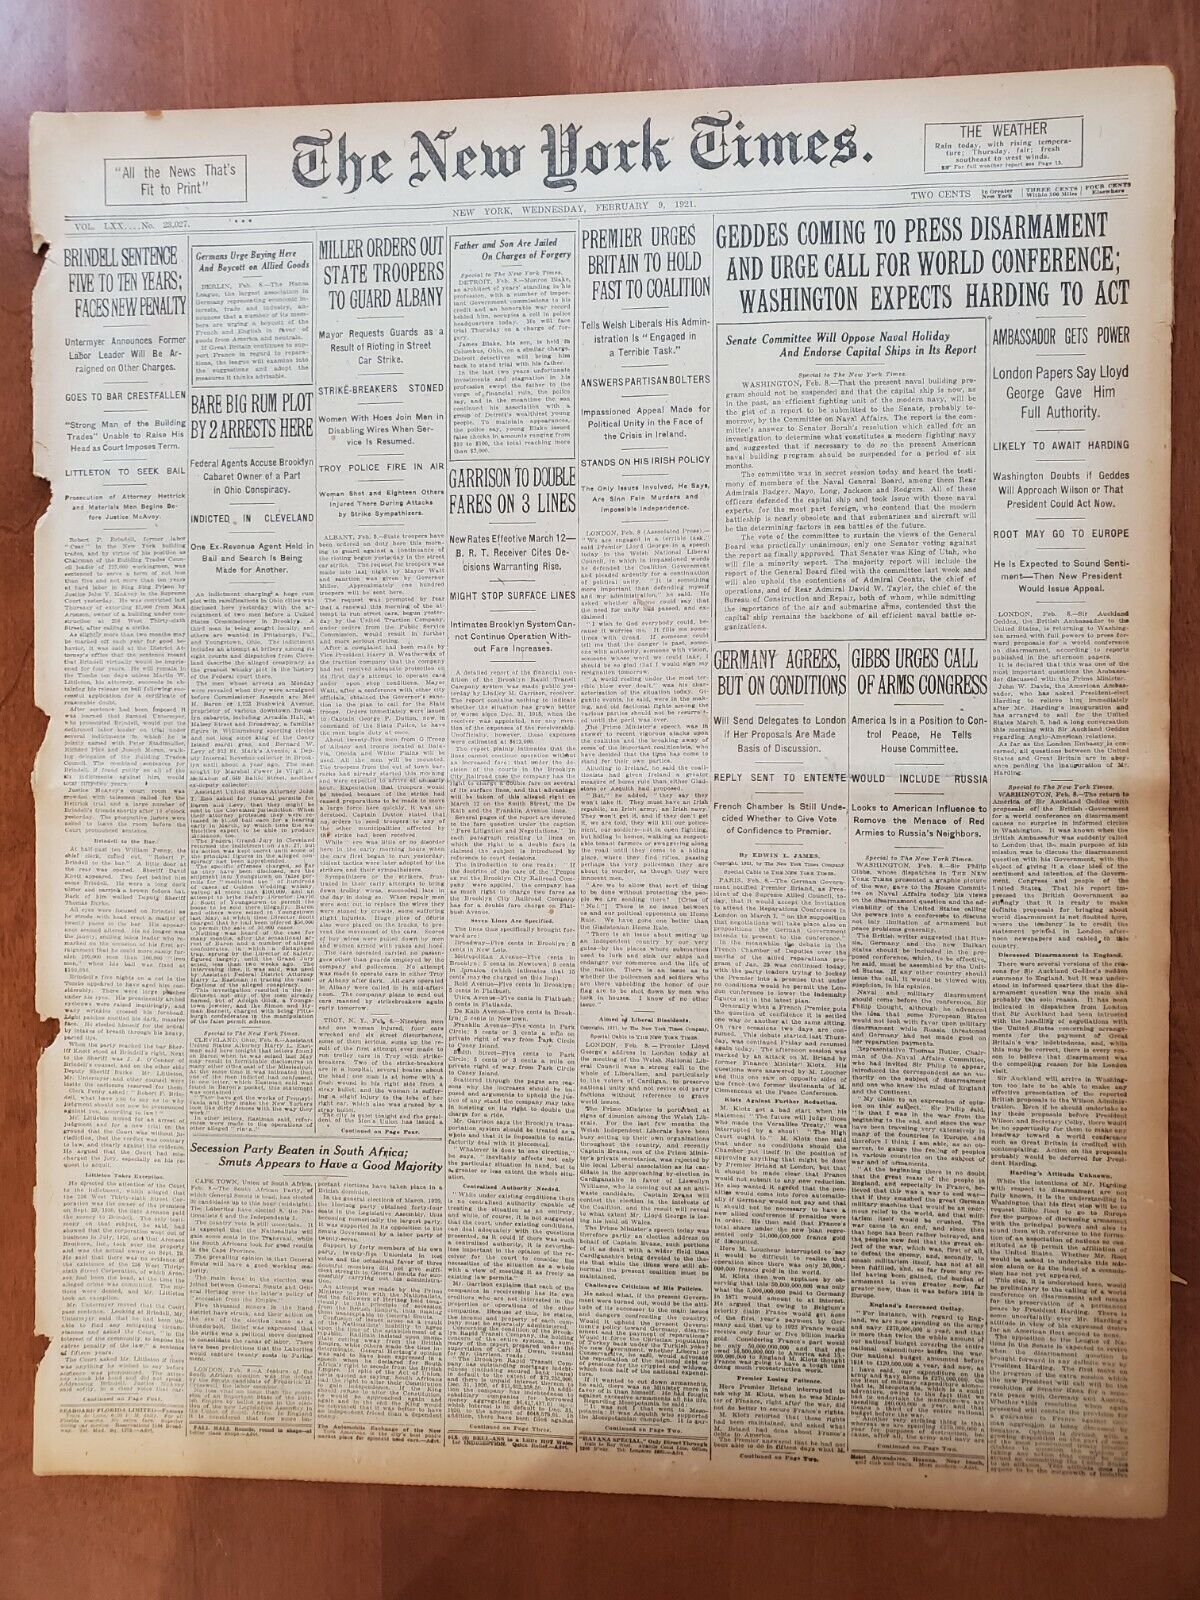 1921 FEBRUARY 9 NEW YORK TIMES - GEDDES COMING TO PRESS DISARMAMENT - NT 8118